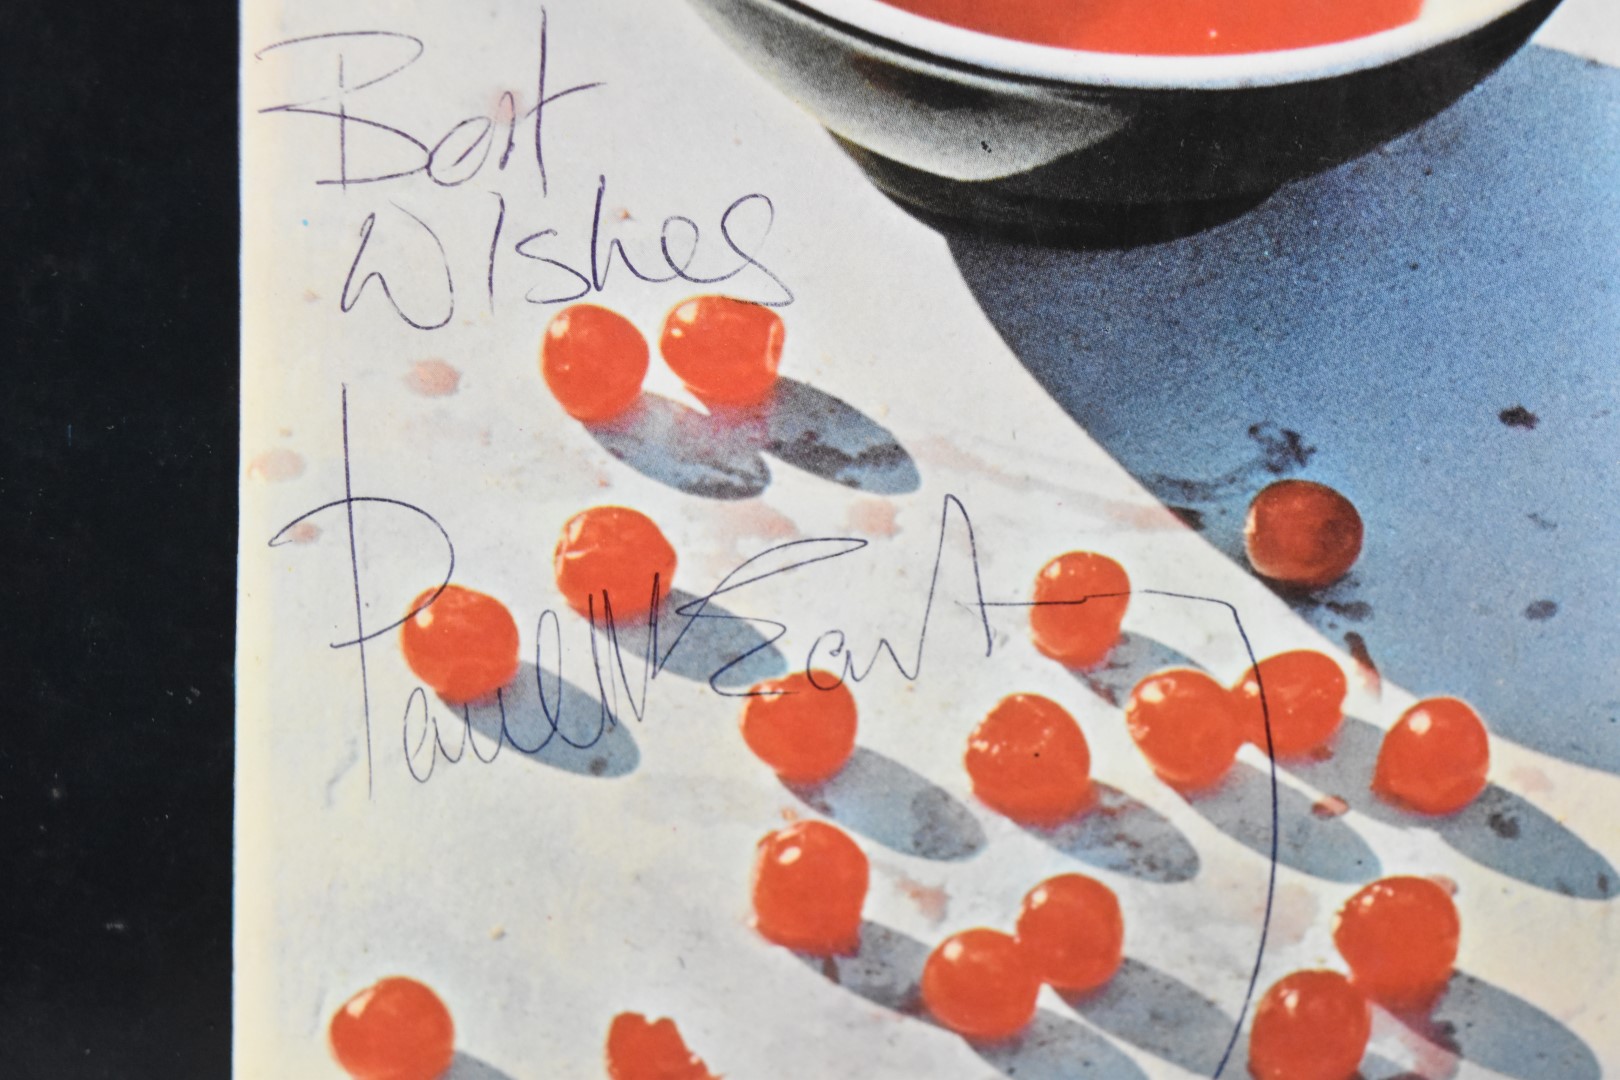 Paul McCartney McCartney album with writing 'Best Wishes Paul McCartney' to cover. From the estate - Image 2 of 5